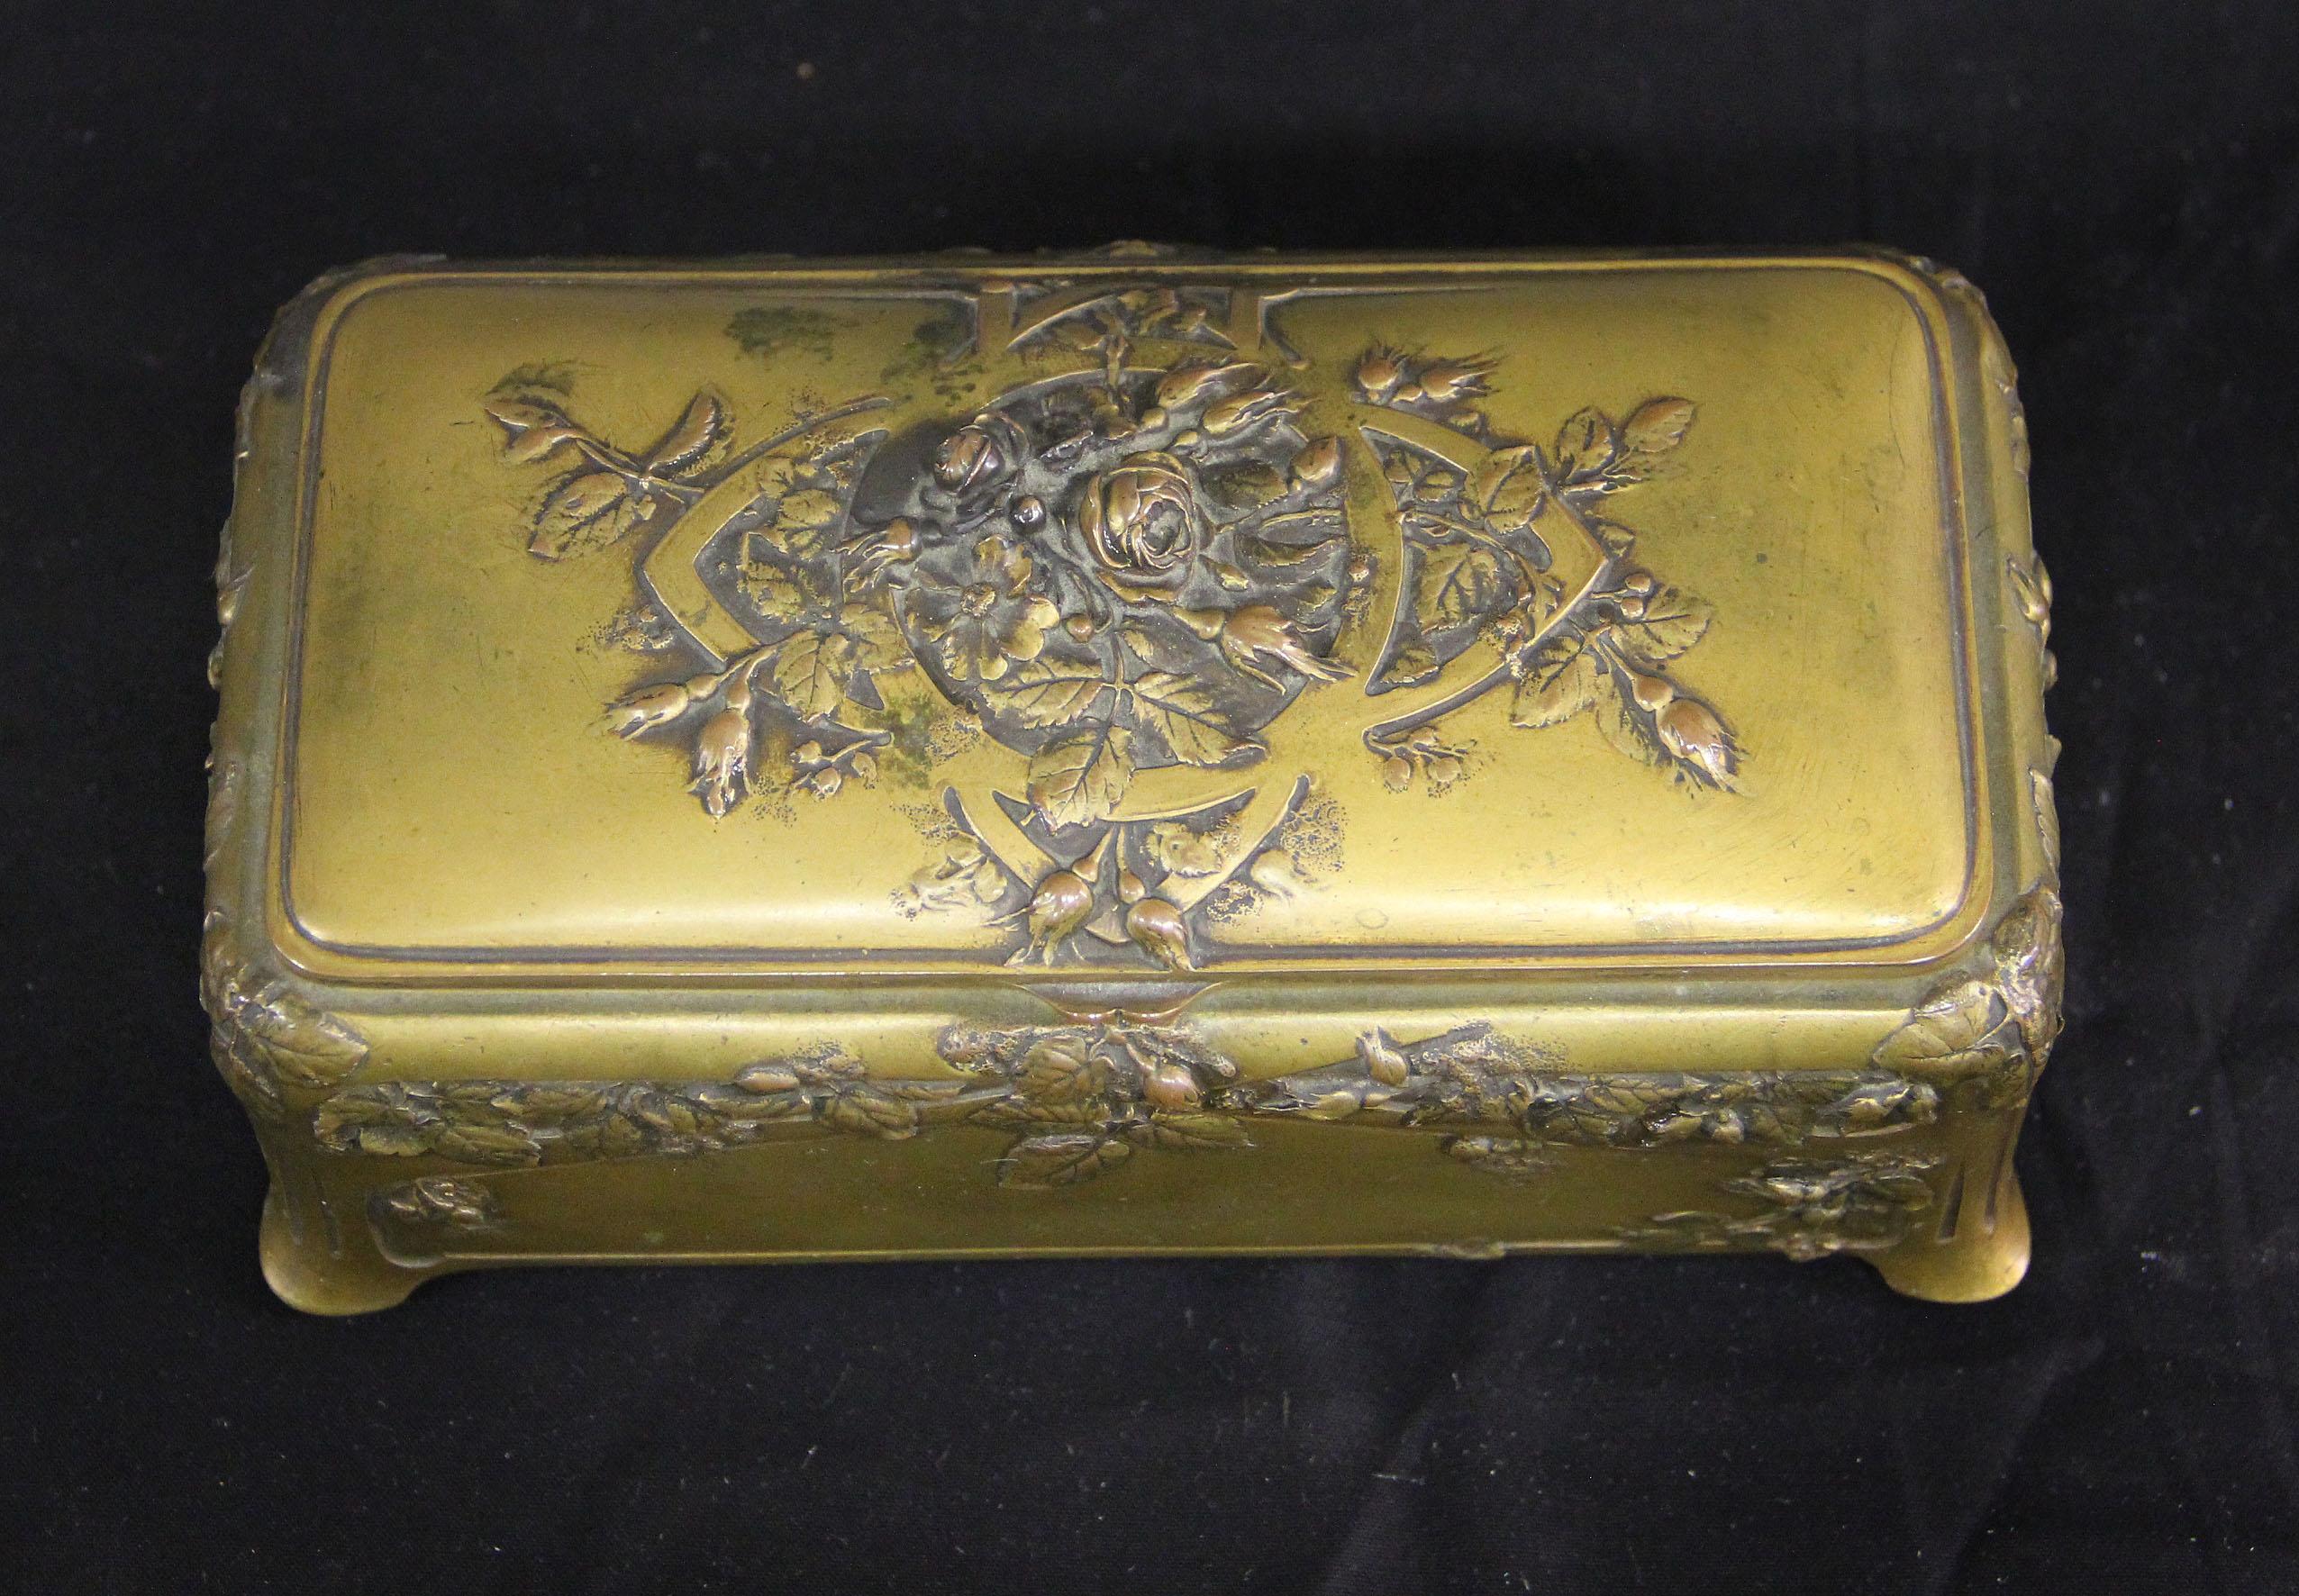 An interesting late 19th century gilt bronze jewelry box

The front, top and sides of the box is designed with bronze flowers and foliage.